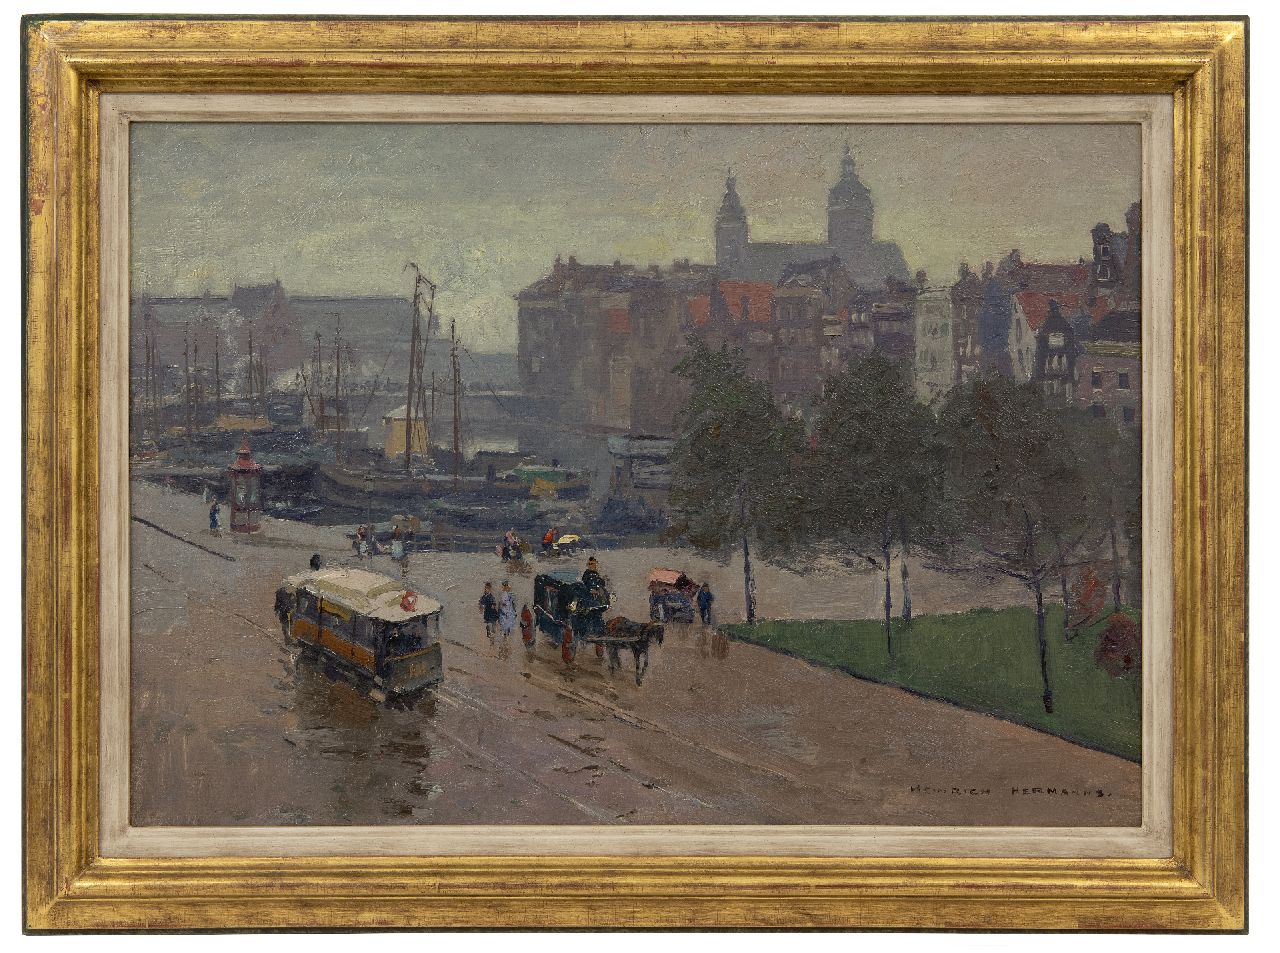 Hermanns H.  | Heinrich Hermanns | Paintings offered for sale | The Damrak, Amsterdam, oil on canvas 44.6 x 63.6 cm, signed l.r.